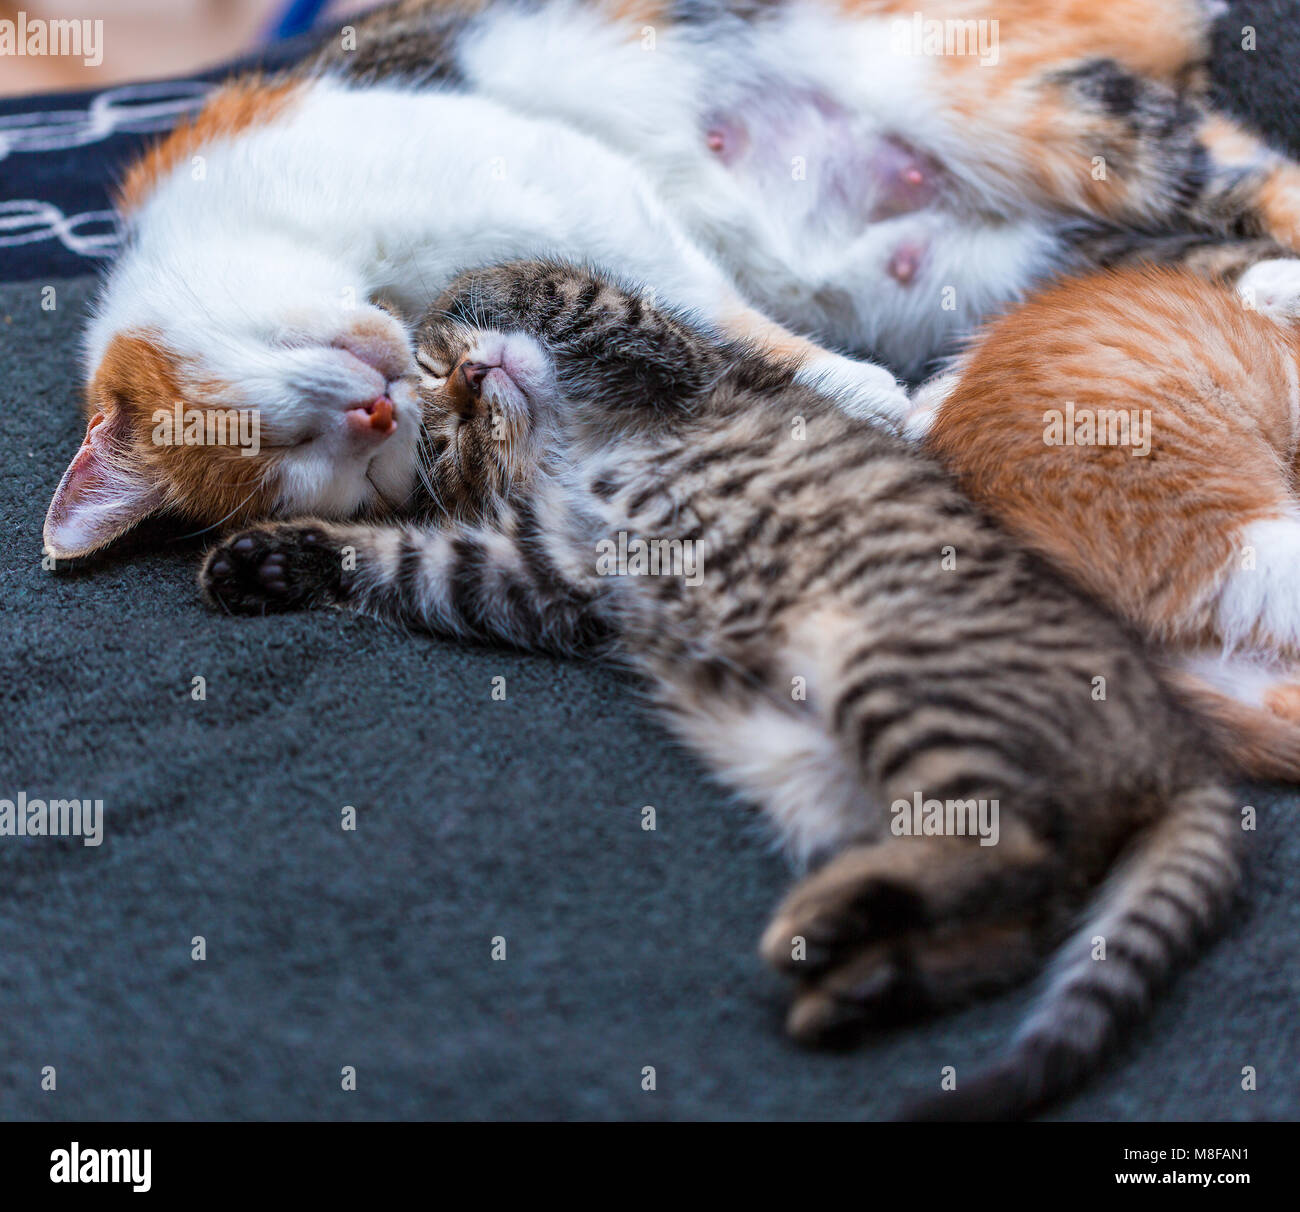 Tricolor cat and cute tabby kitten sleeping on the bed. Cat hugging kitten. Concept of maternal love. Beautiful lovely pets Stock Photo